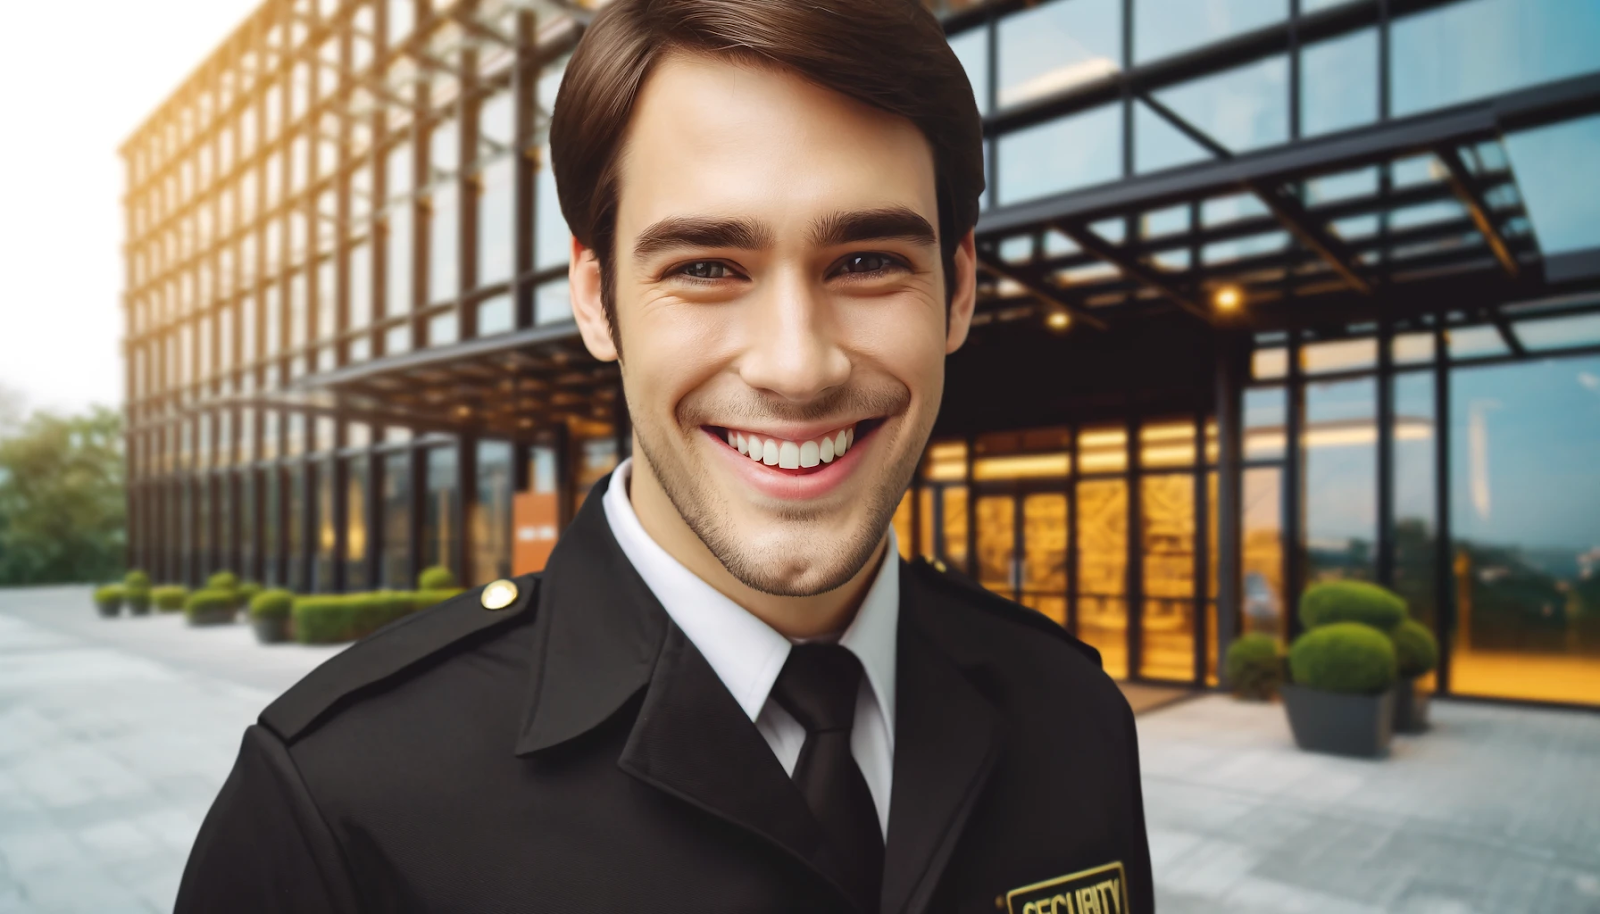 Cheerful security guard in uniform, smiling at the camera with a background of a secure office building in black and gold colors.